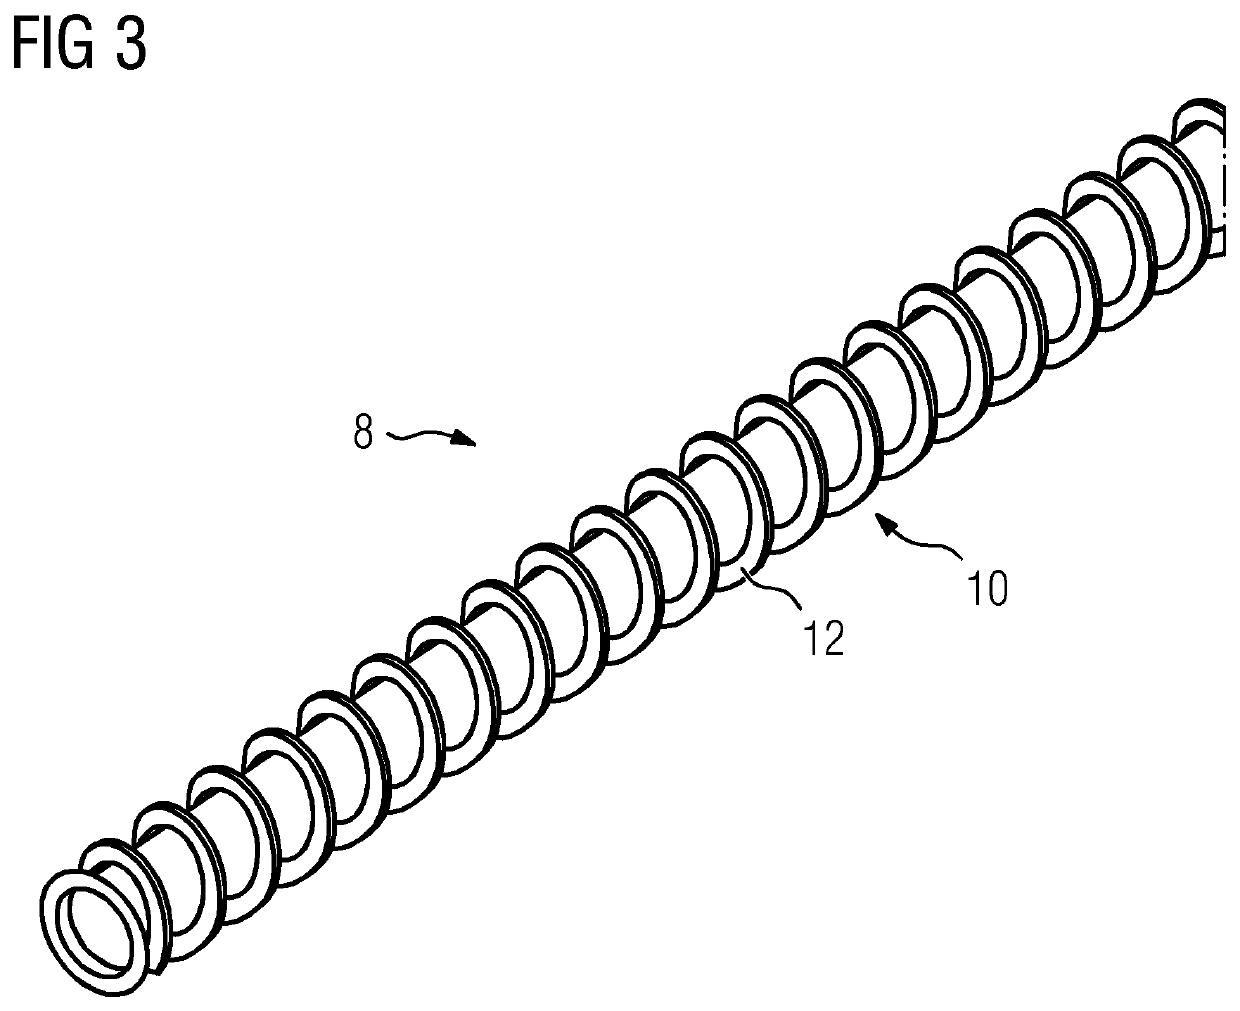 Electric cable for a wind turbine and wind turbine